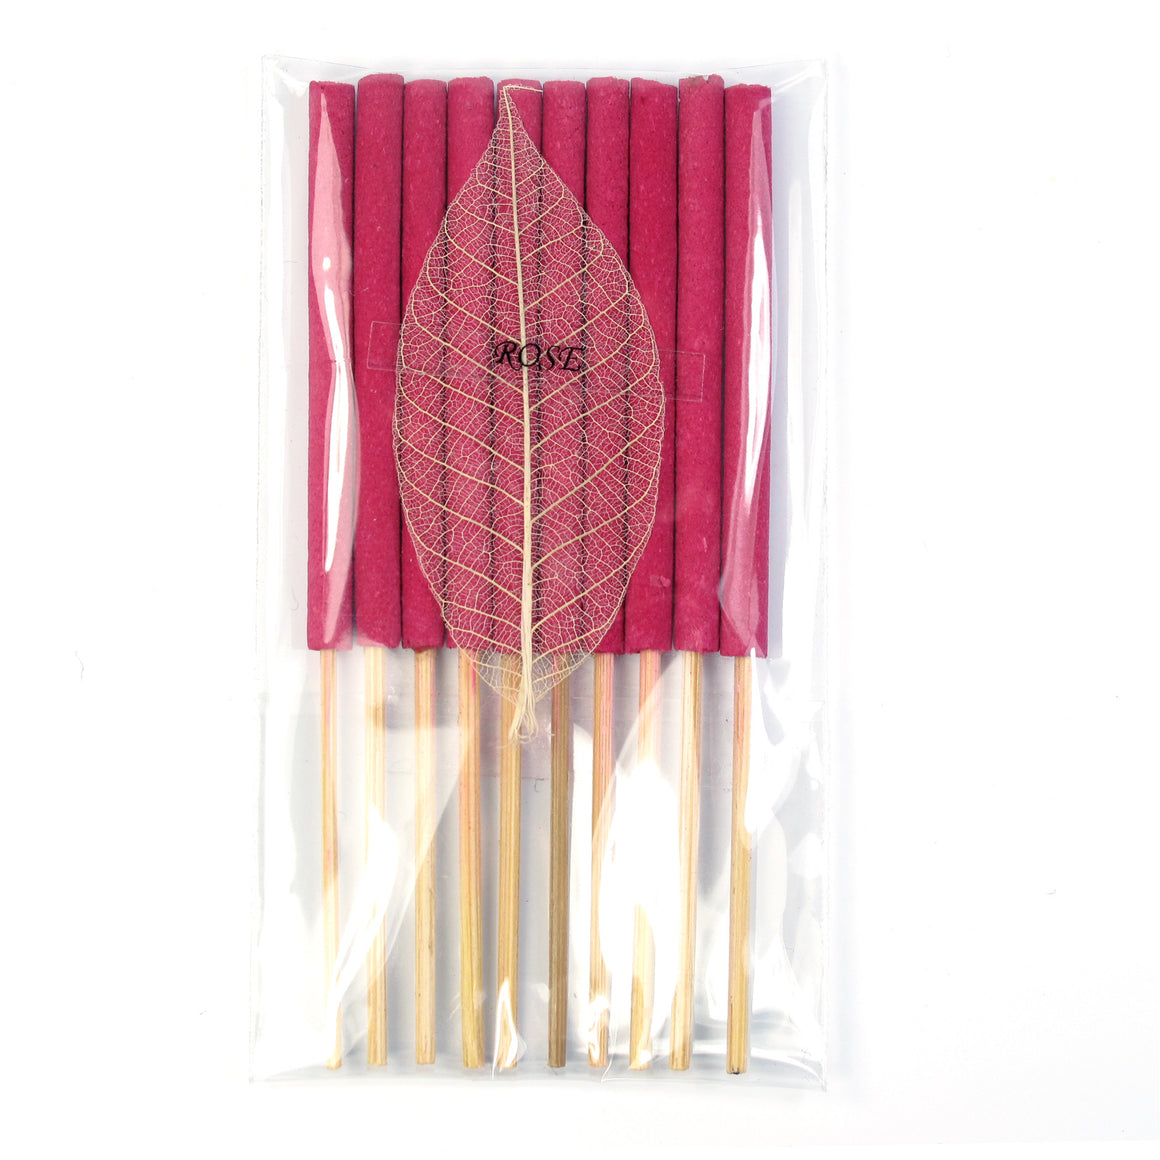 Candle & Incense Gift Set, Pink - TropicaZona